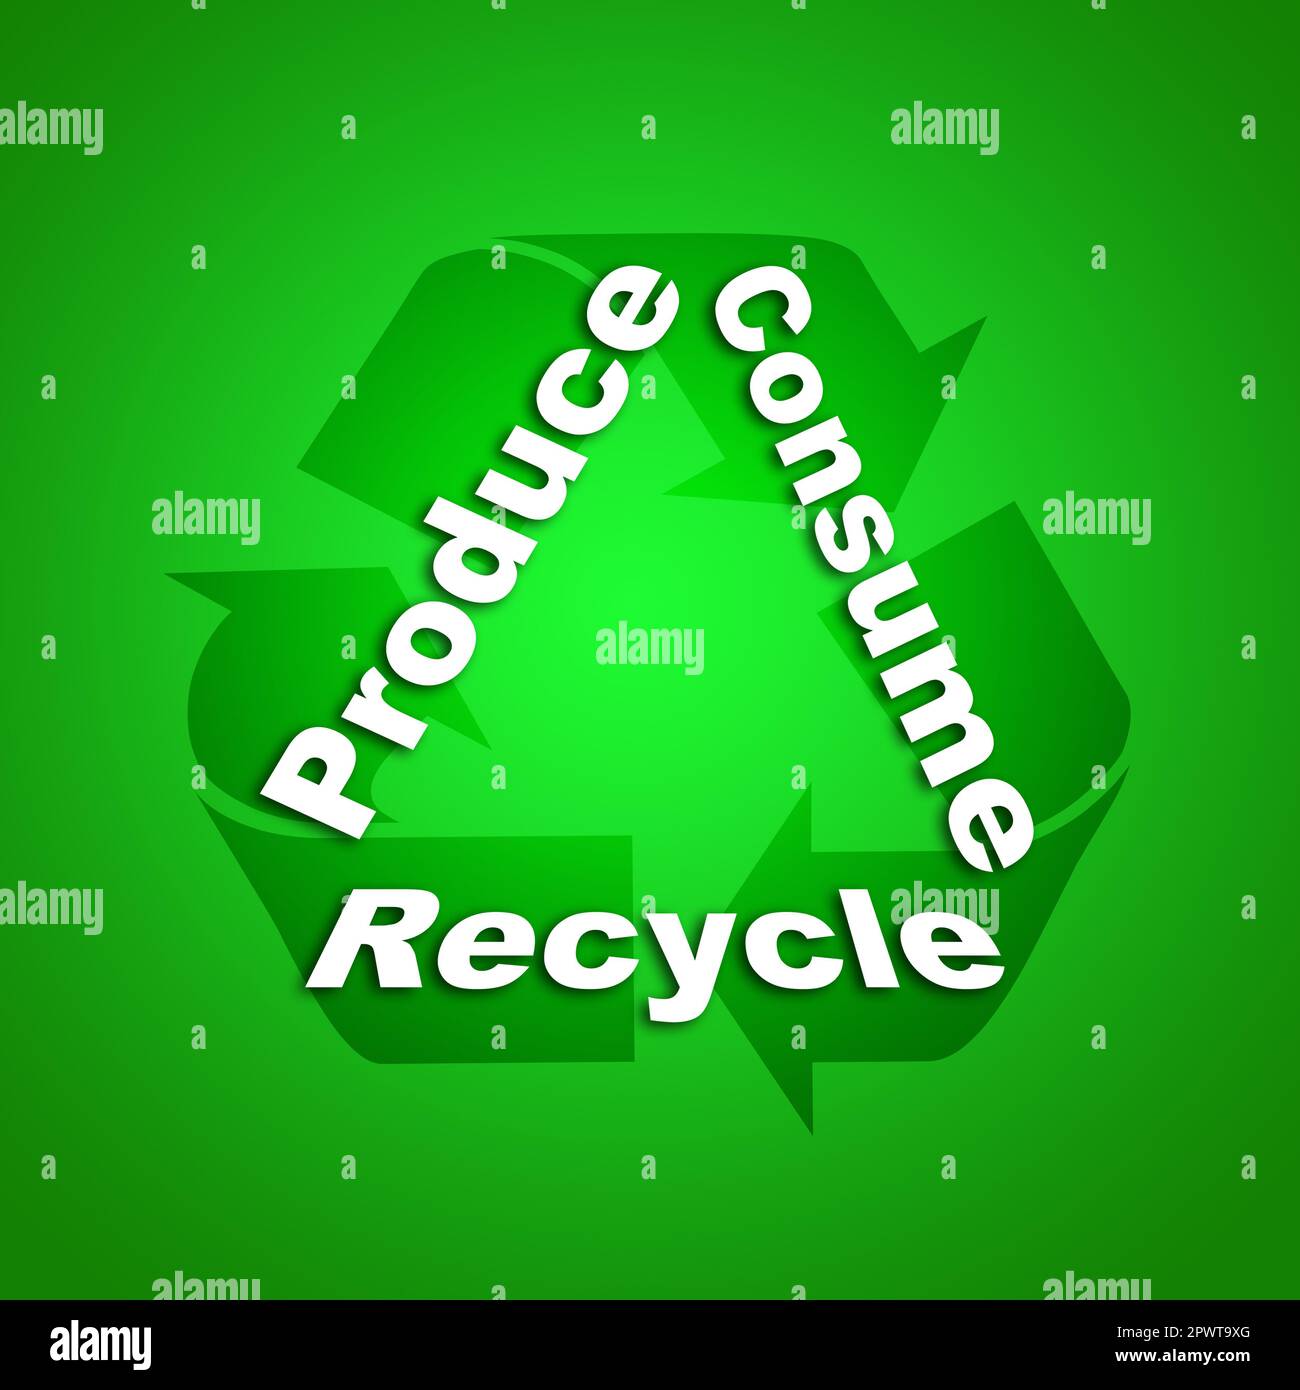 Produce Consume Recycle concept Stock Photo